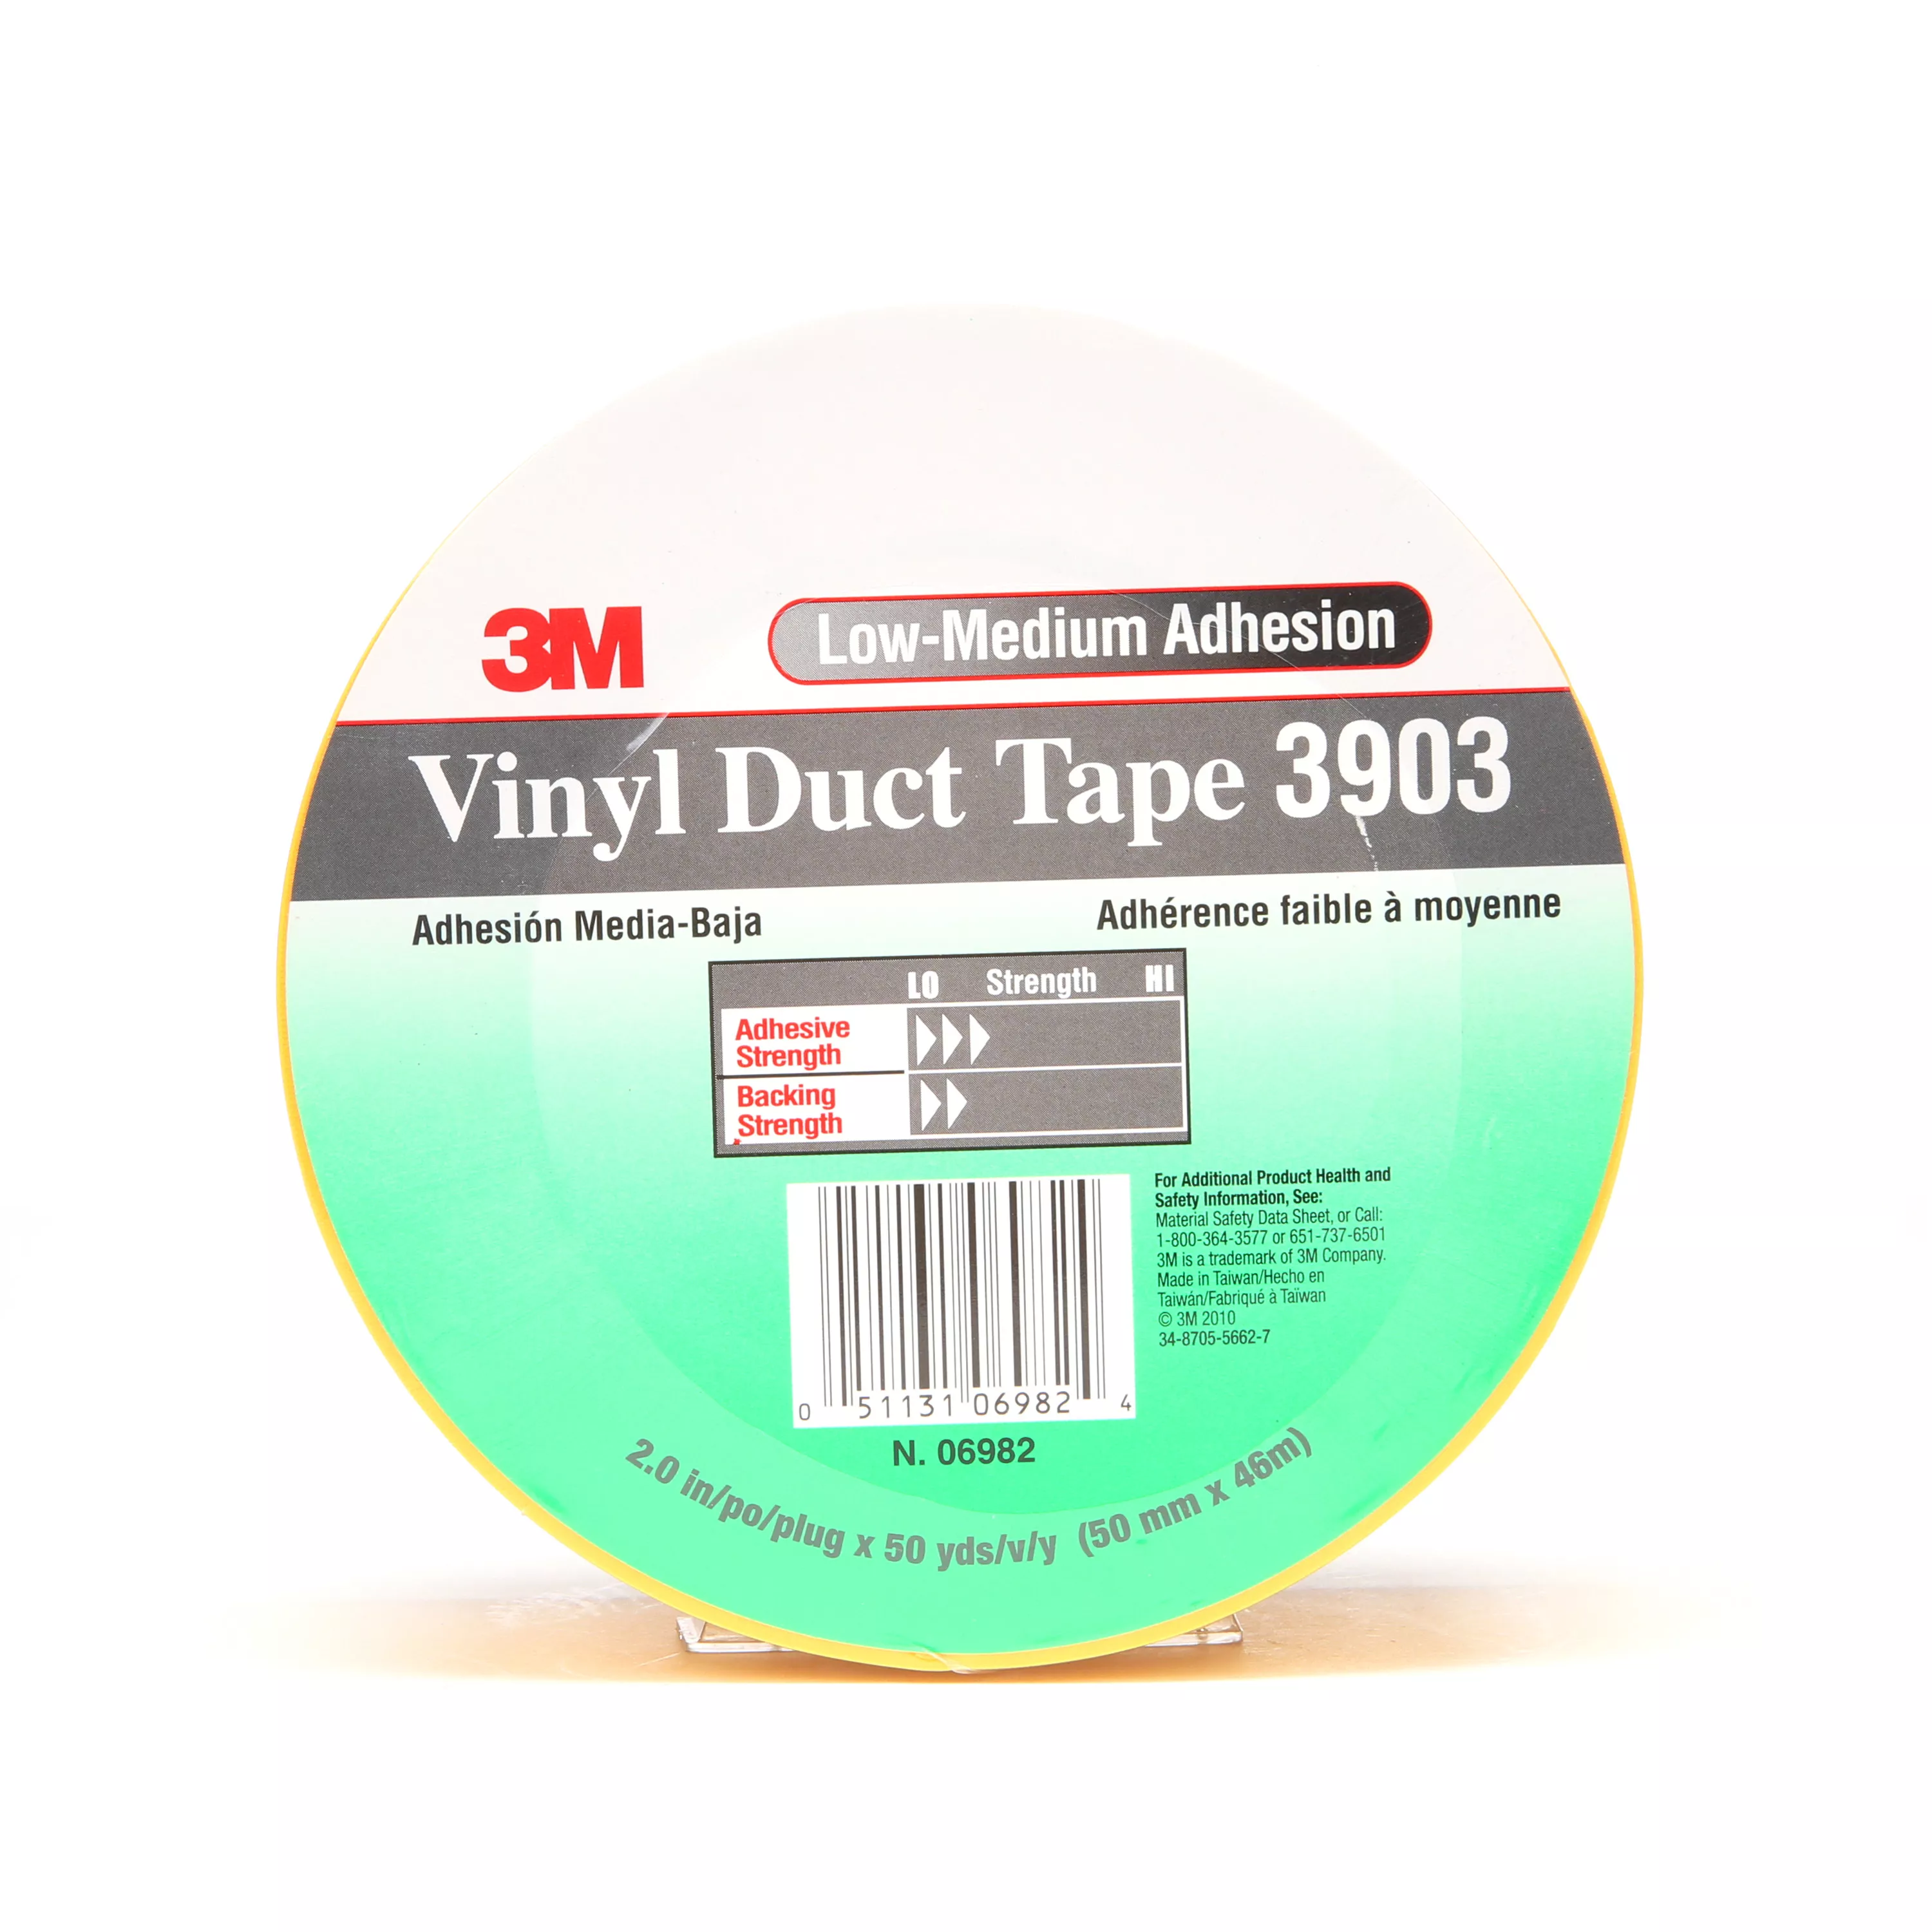 3M™ Vinyl Duct Tape 3903, Yellow, 2 in x 50 yd, 6.5 mil, 24/Case,
Individually Wrapped Conveniently Packaged